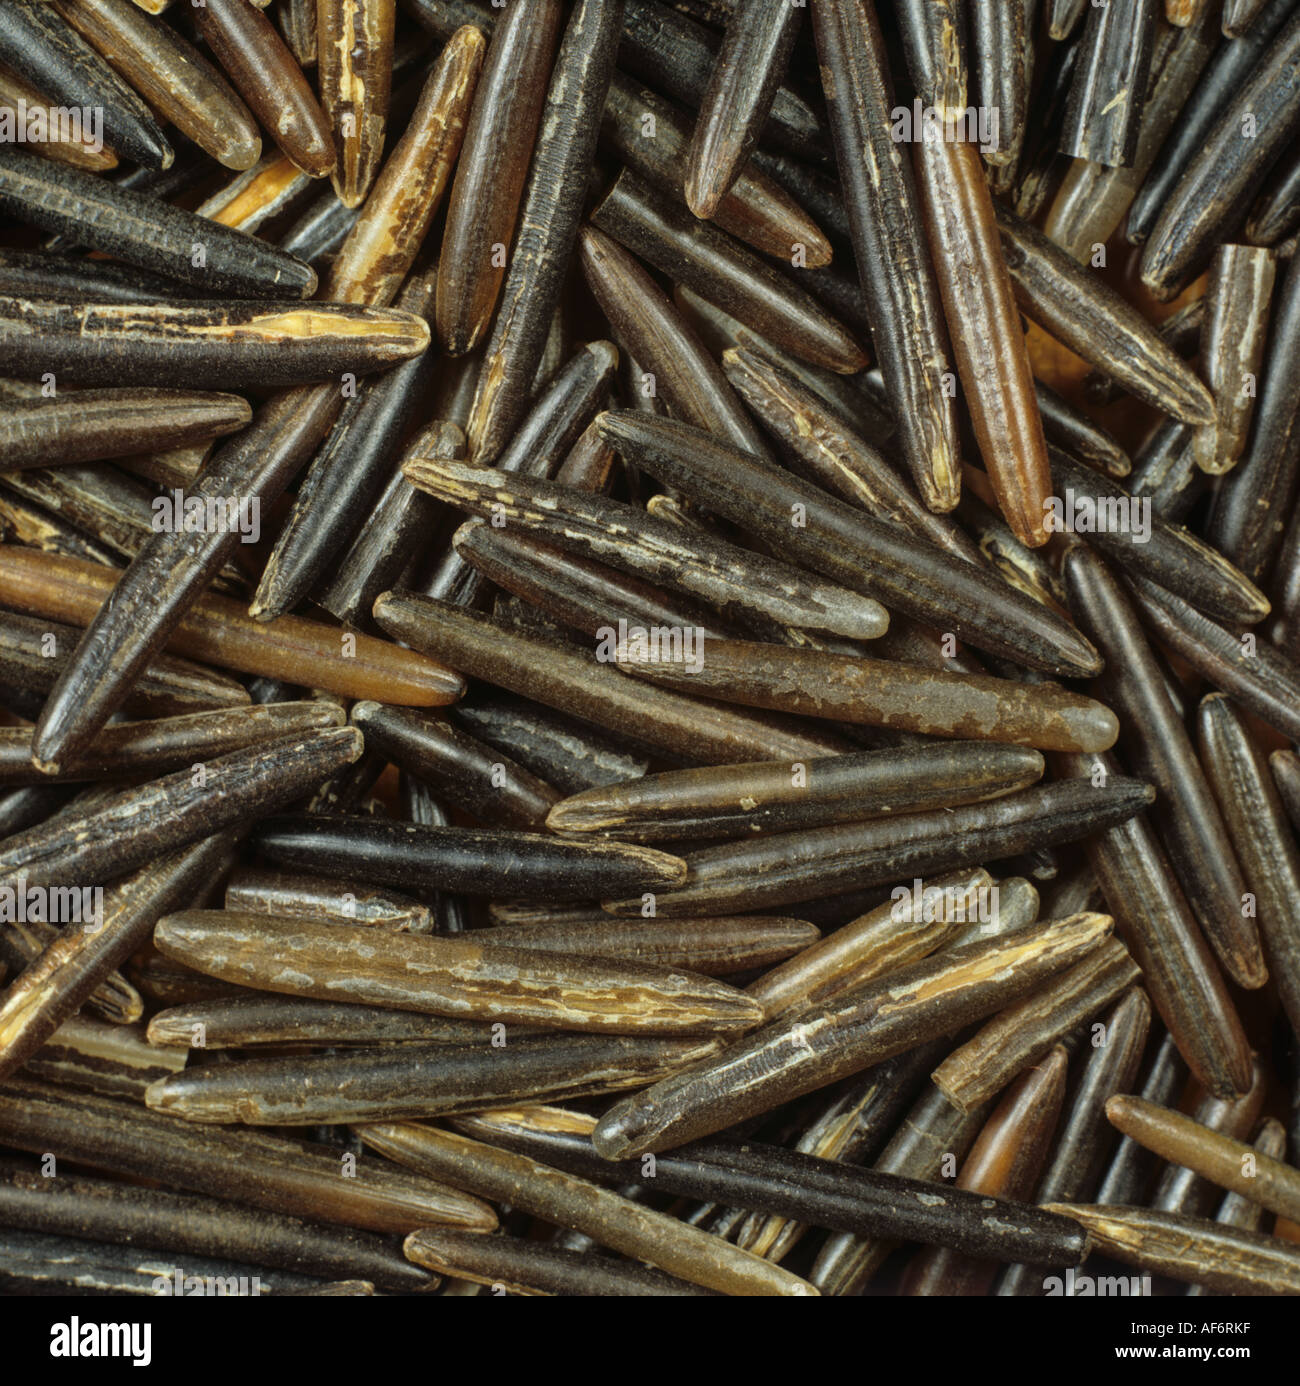 Wild rice grains as sold for cooking Stock Photo